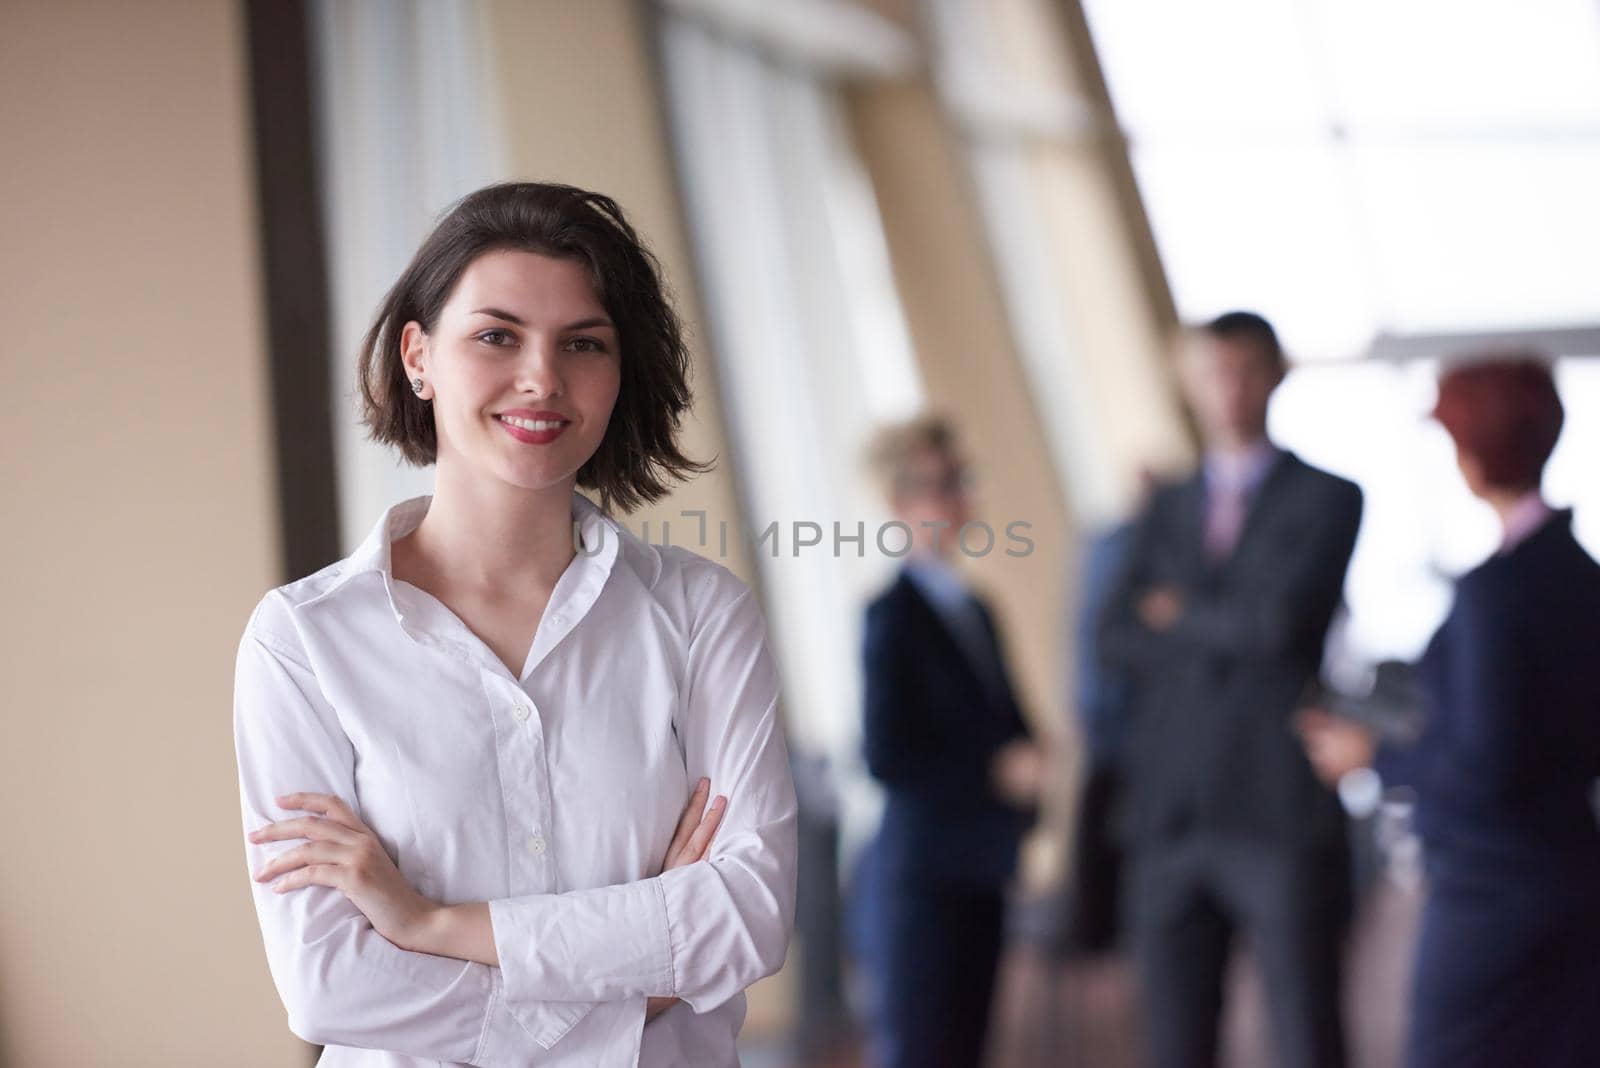 Smilling young business woman in front her team blured in background. Group of young business people. Modern bright  startup office interior.